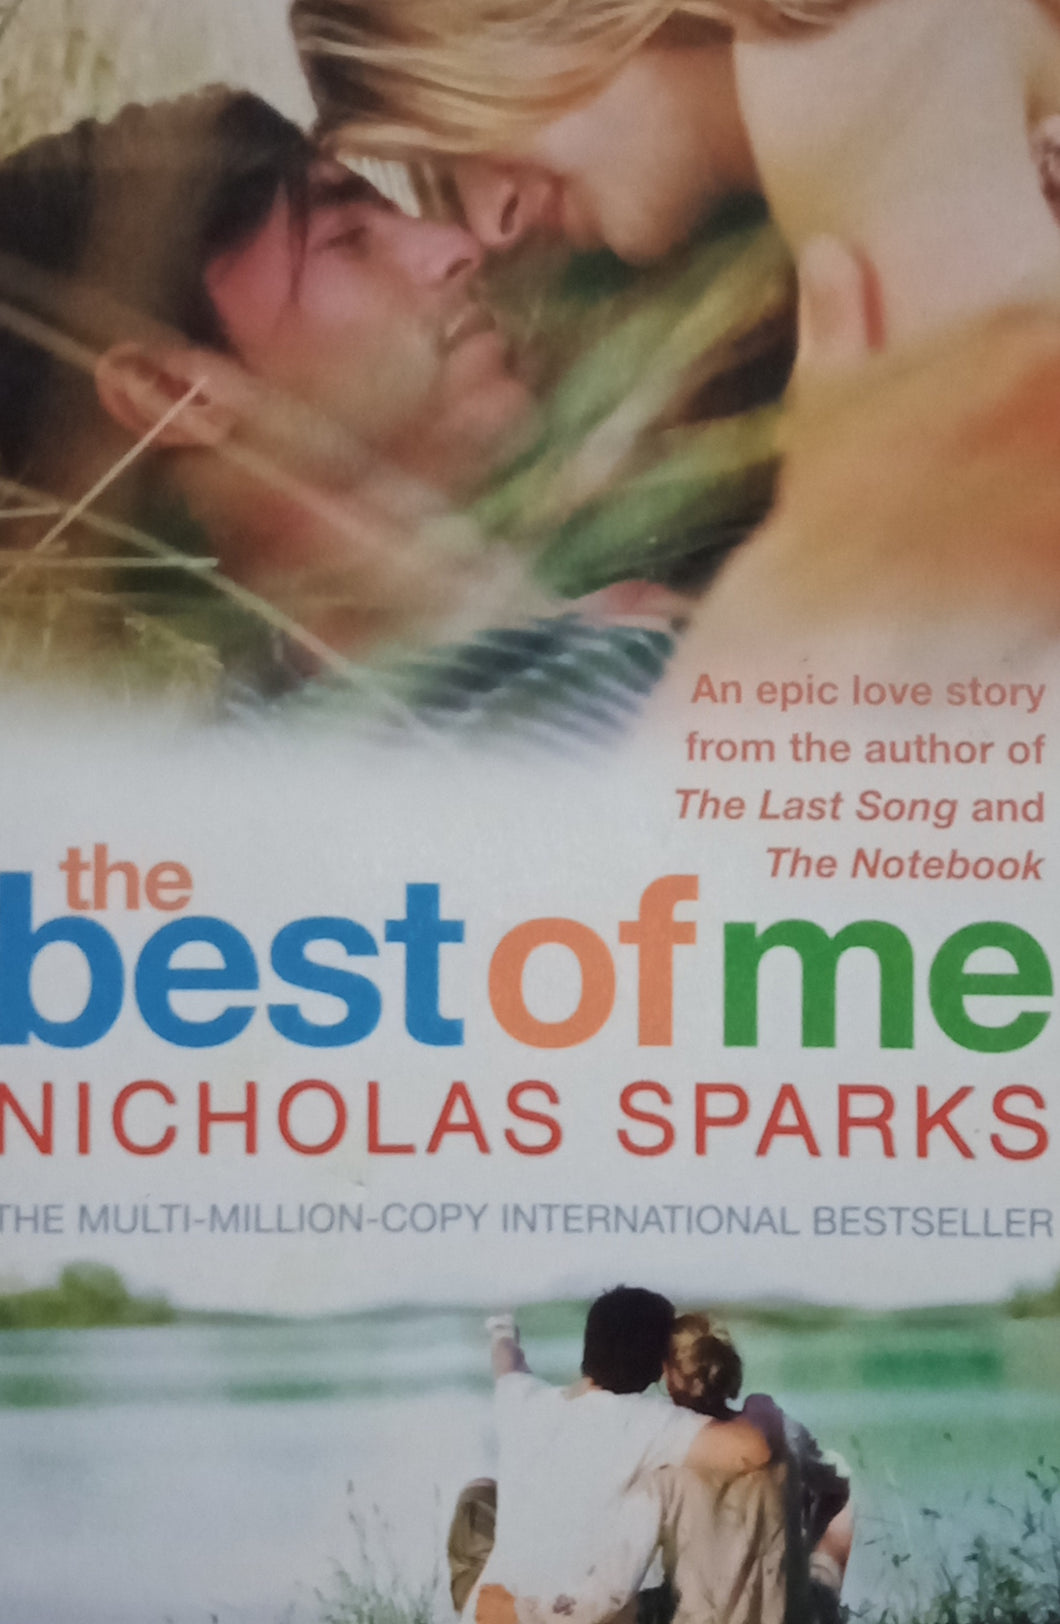 The Best Of Me by Nicholas Sparks